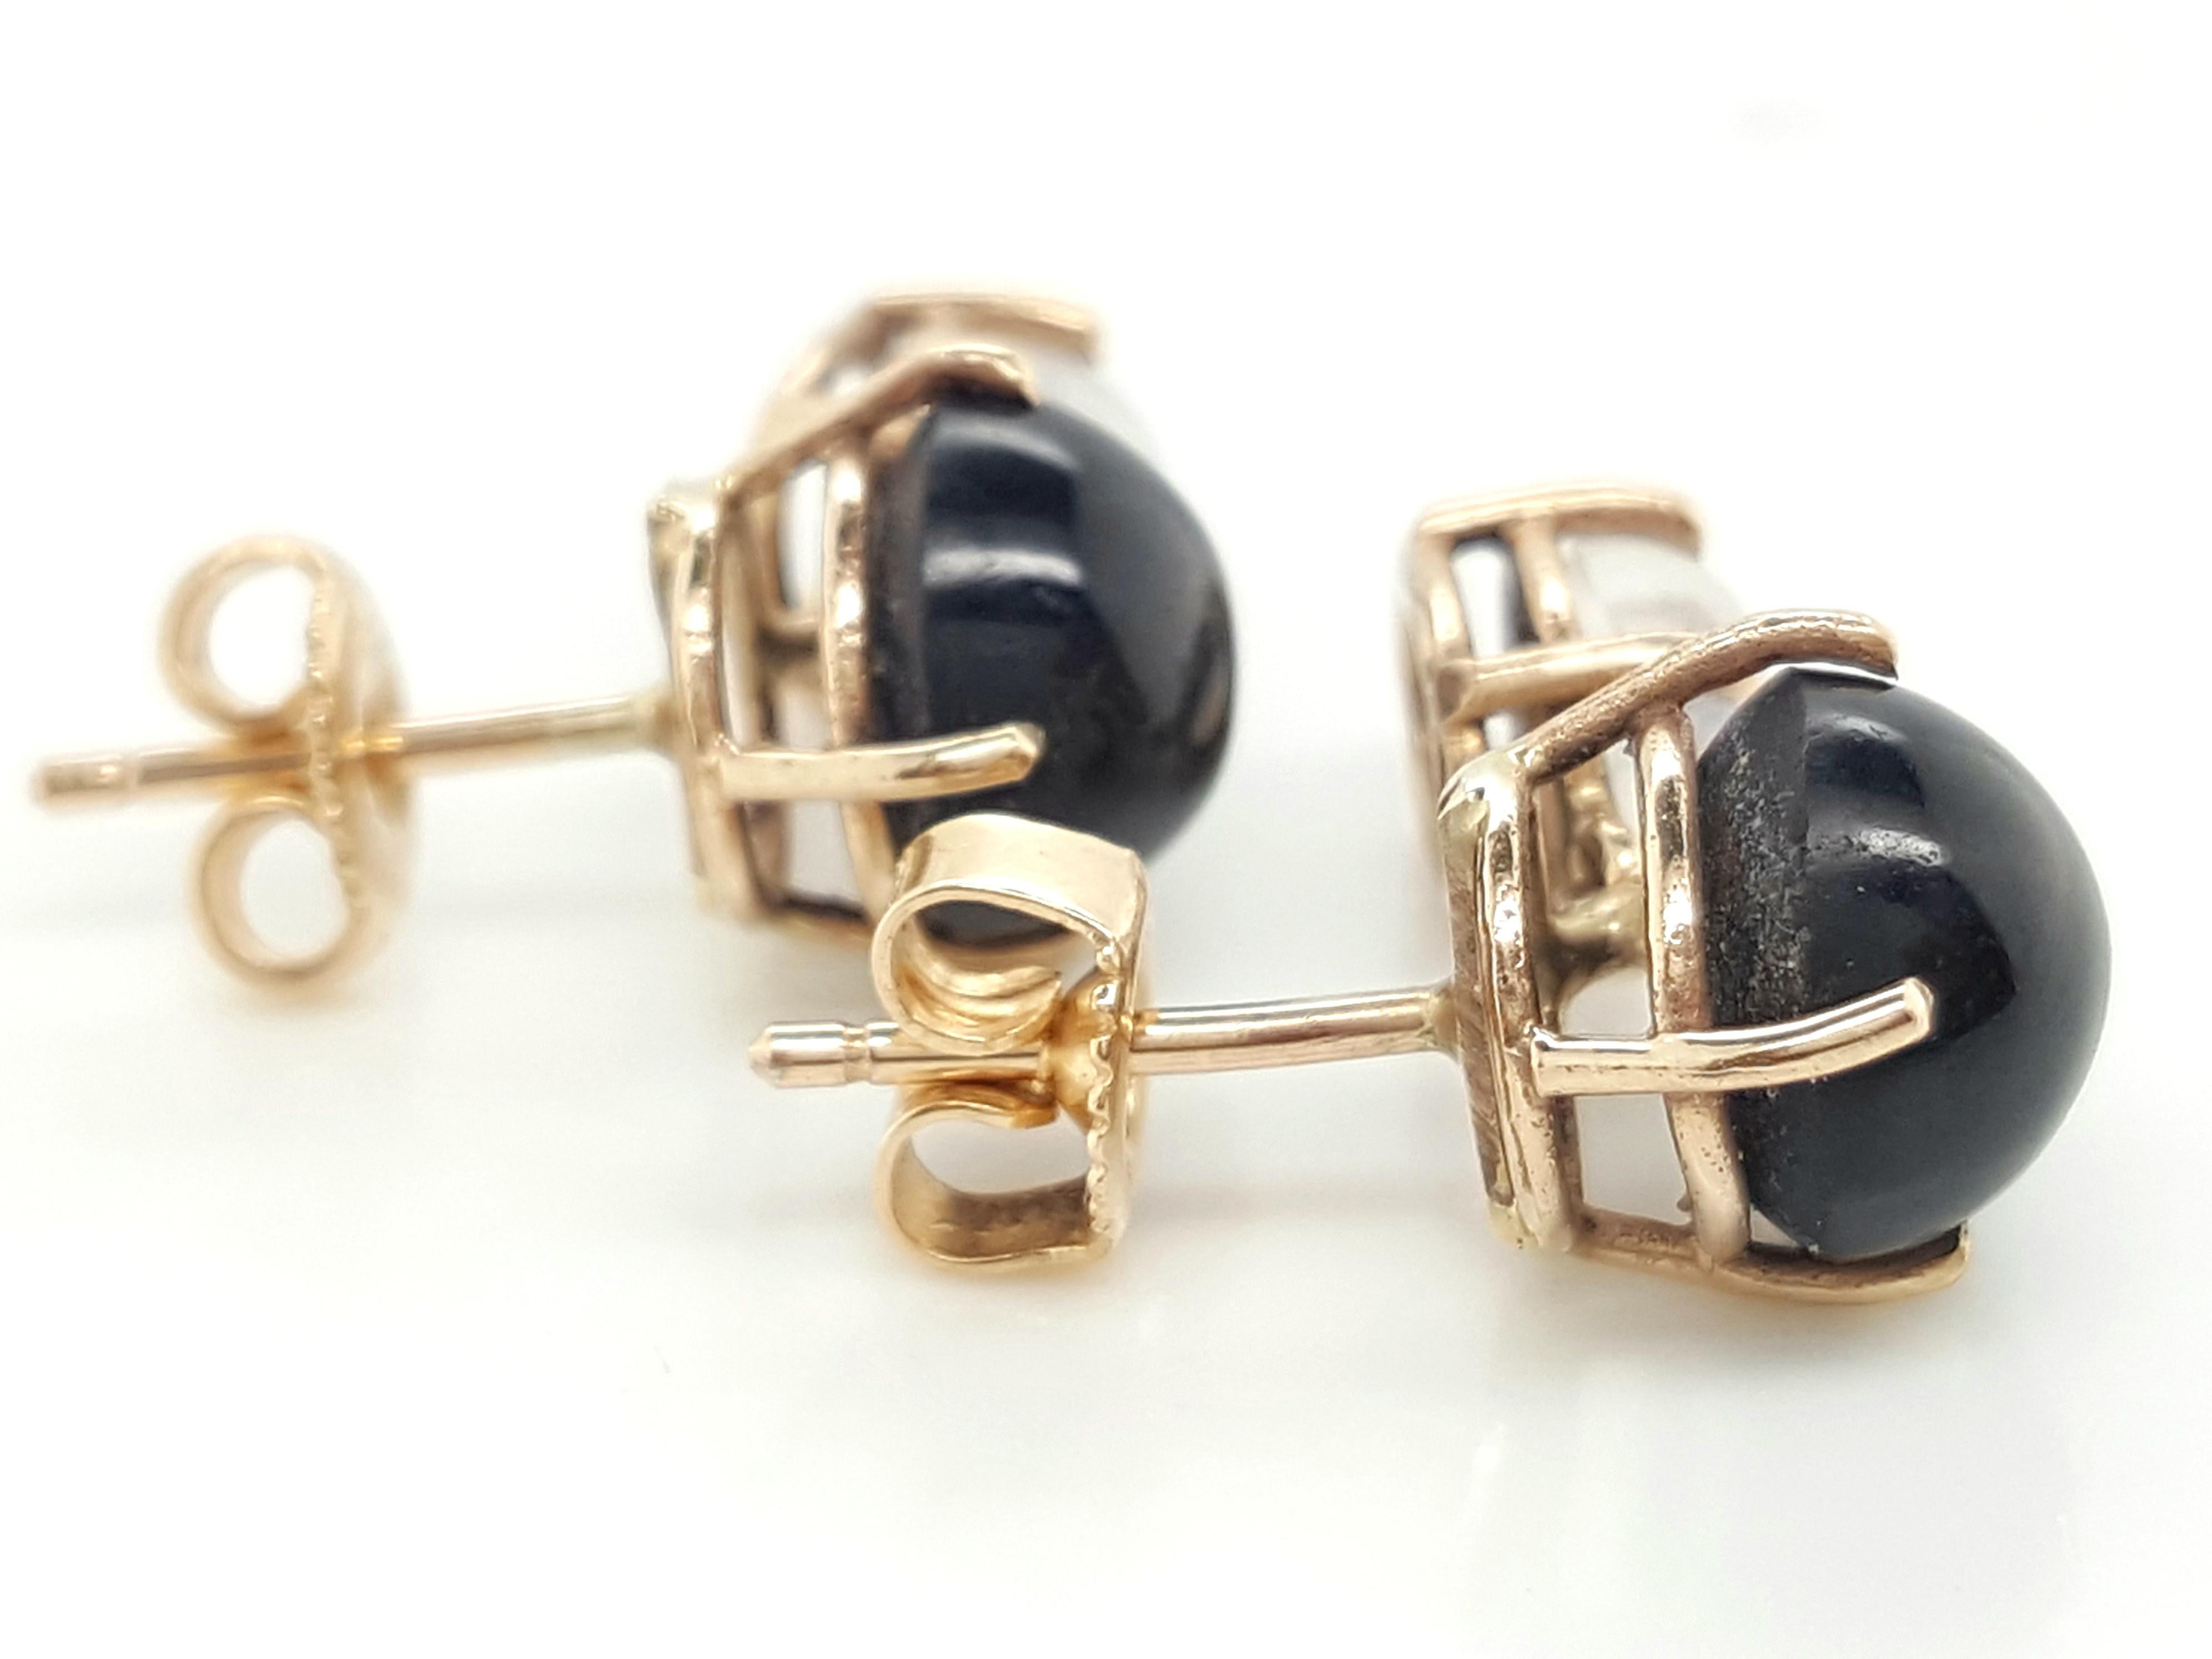 14 Karat Yellow Gold Black Star Diopside and Moonstone Earrings  The earrings feature a pair of black star diopside each set into a 14 karat yellow gold four prong basket setting.   Suspended from the star diopside are.a pair of oval cabochon